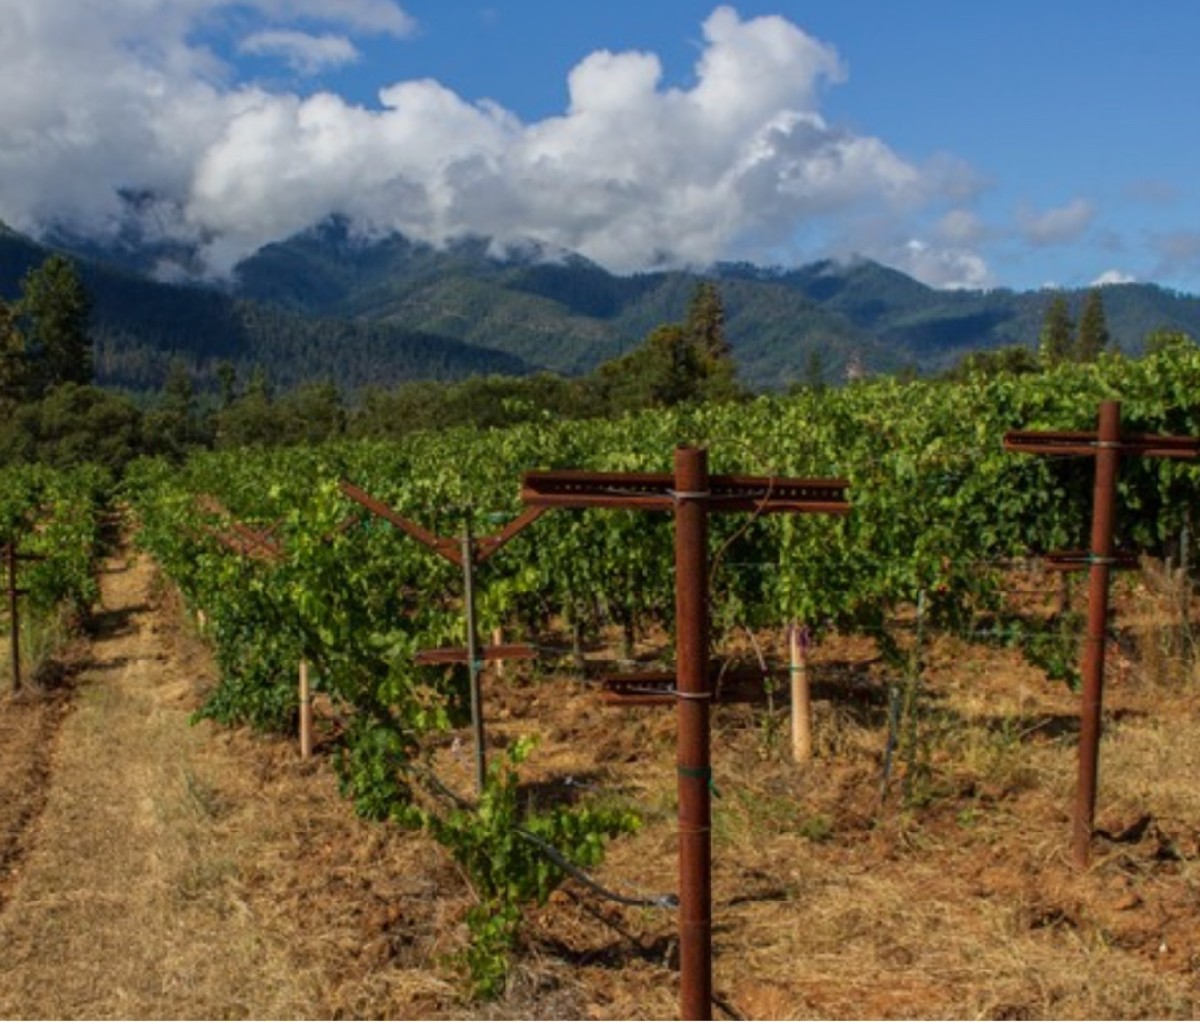 Day Wines is a vineyard in Oregon